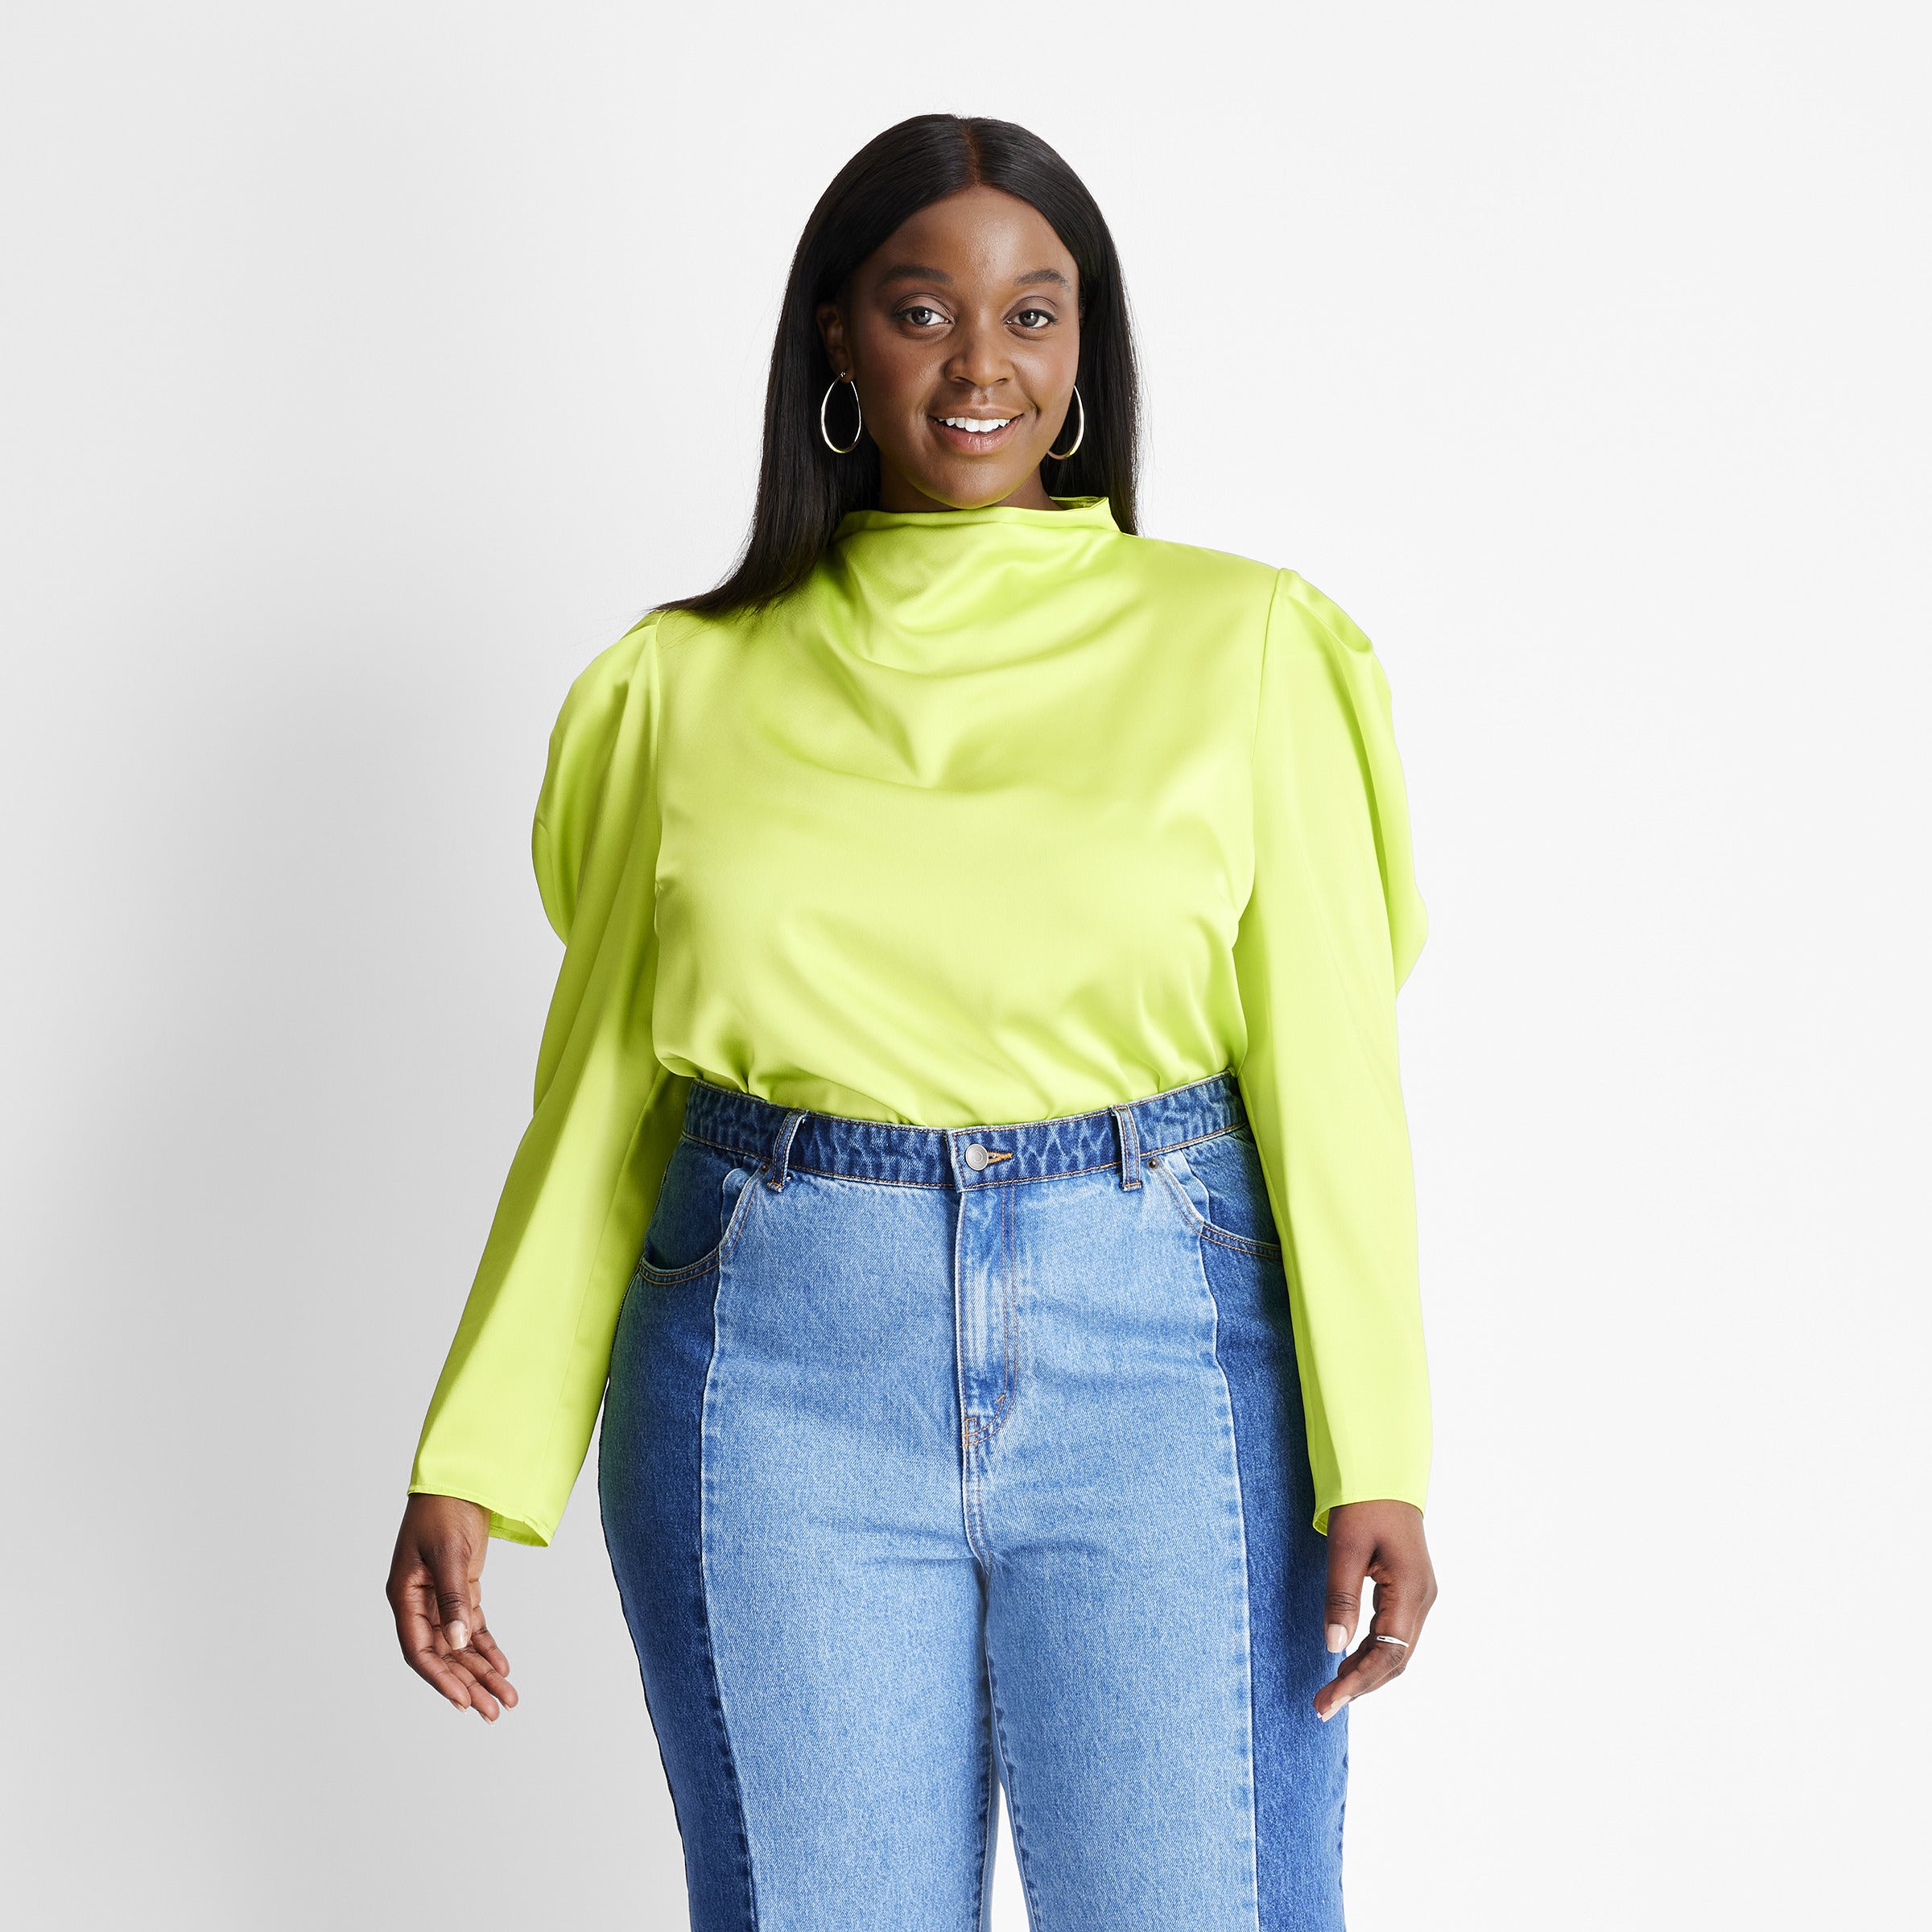 Target's Future Collective First Brand Designer | Kahlana Barfield ...